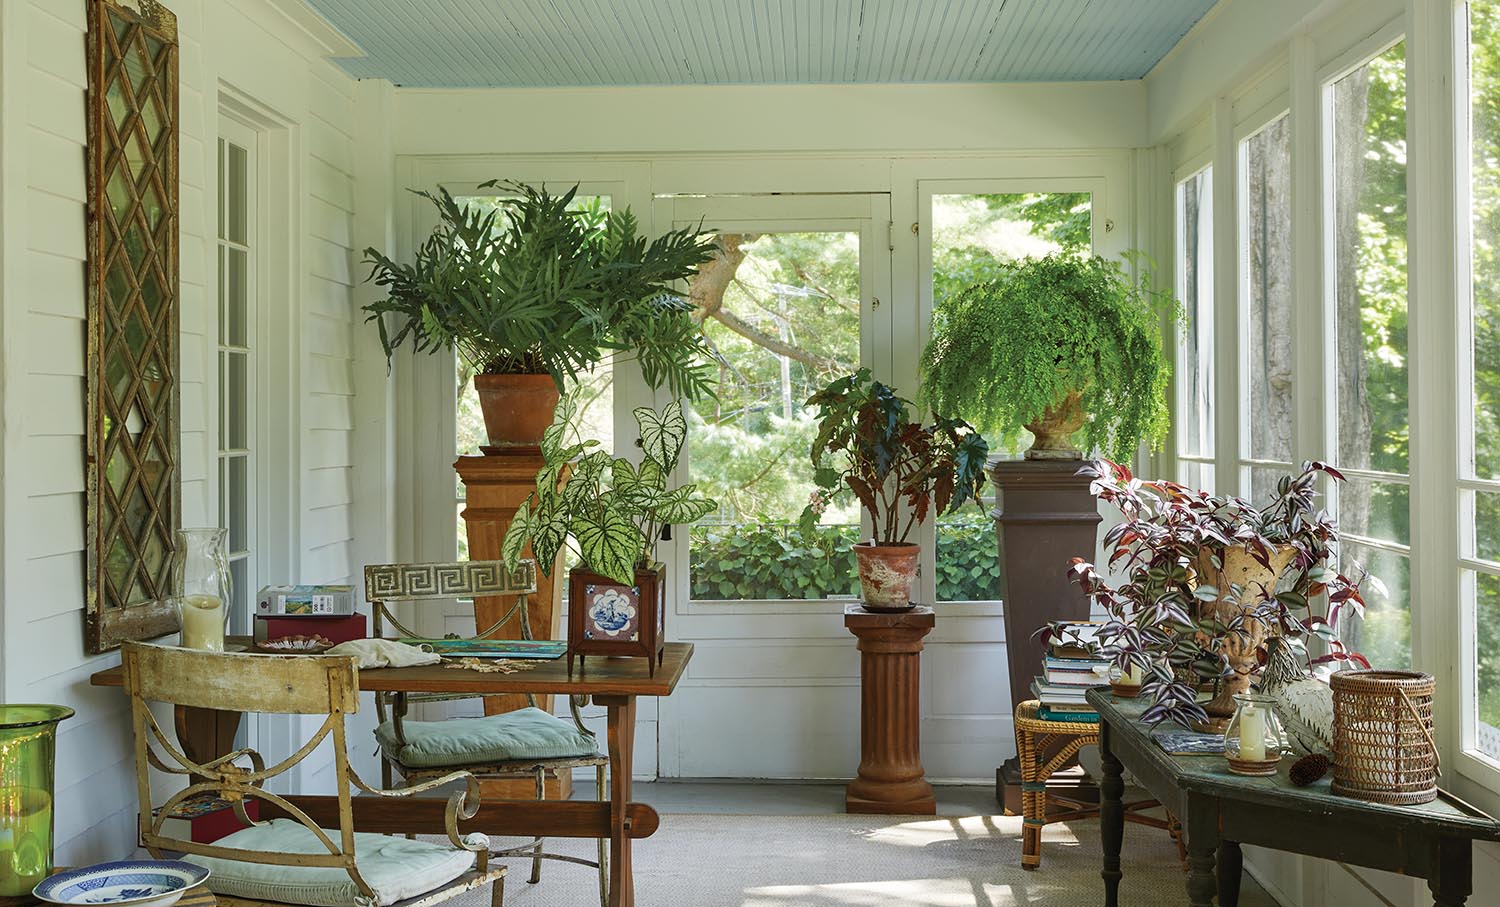 Ferns and other houseplants in a sunroom, Bunny Williams' conservatory.